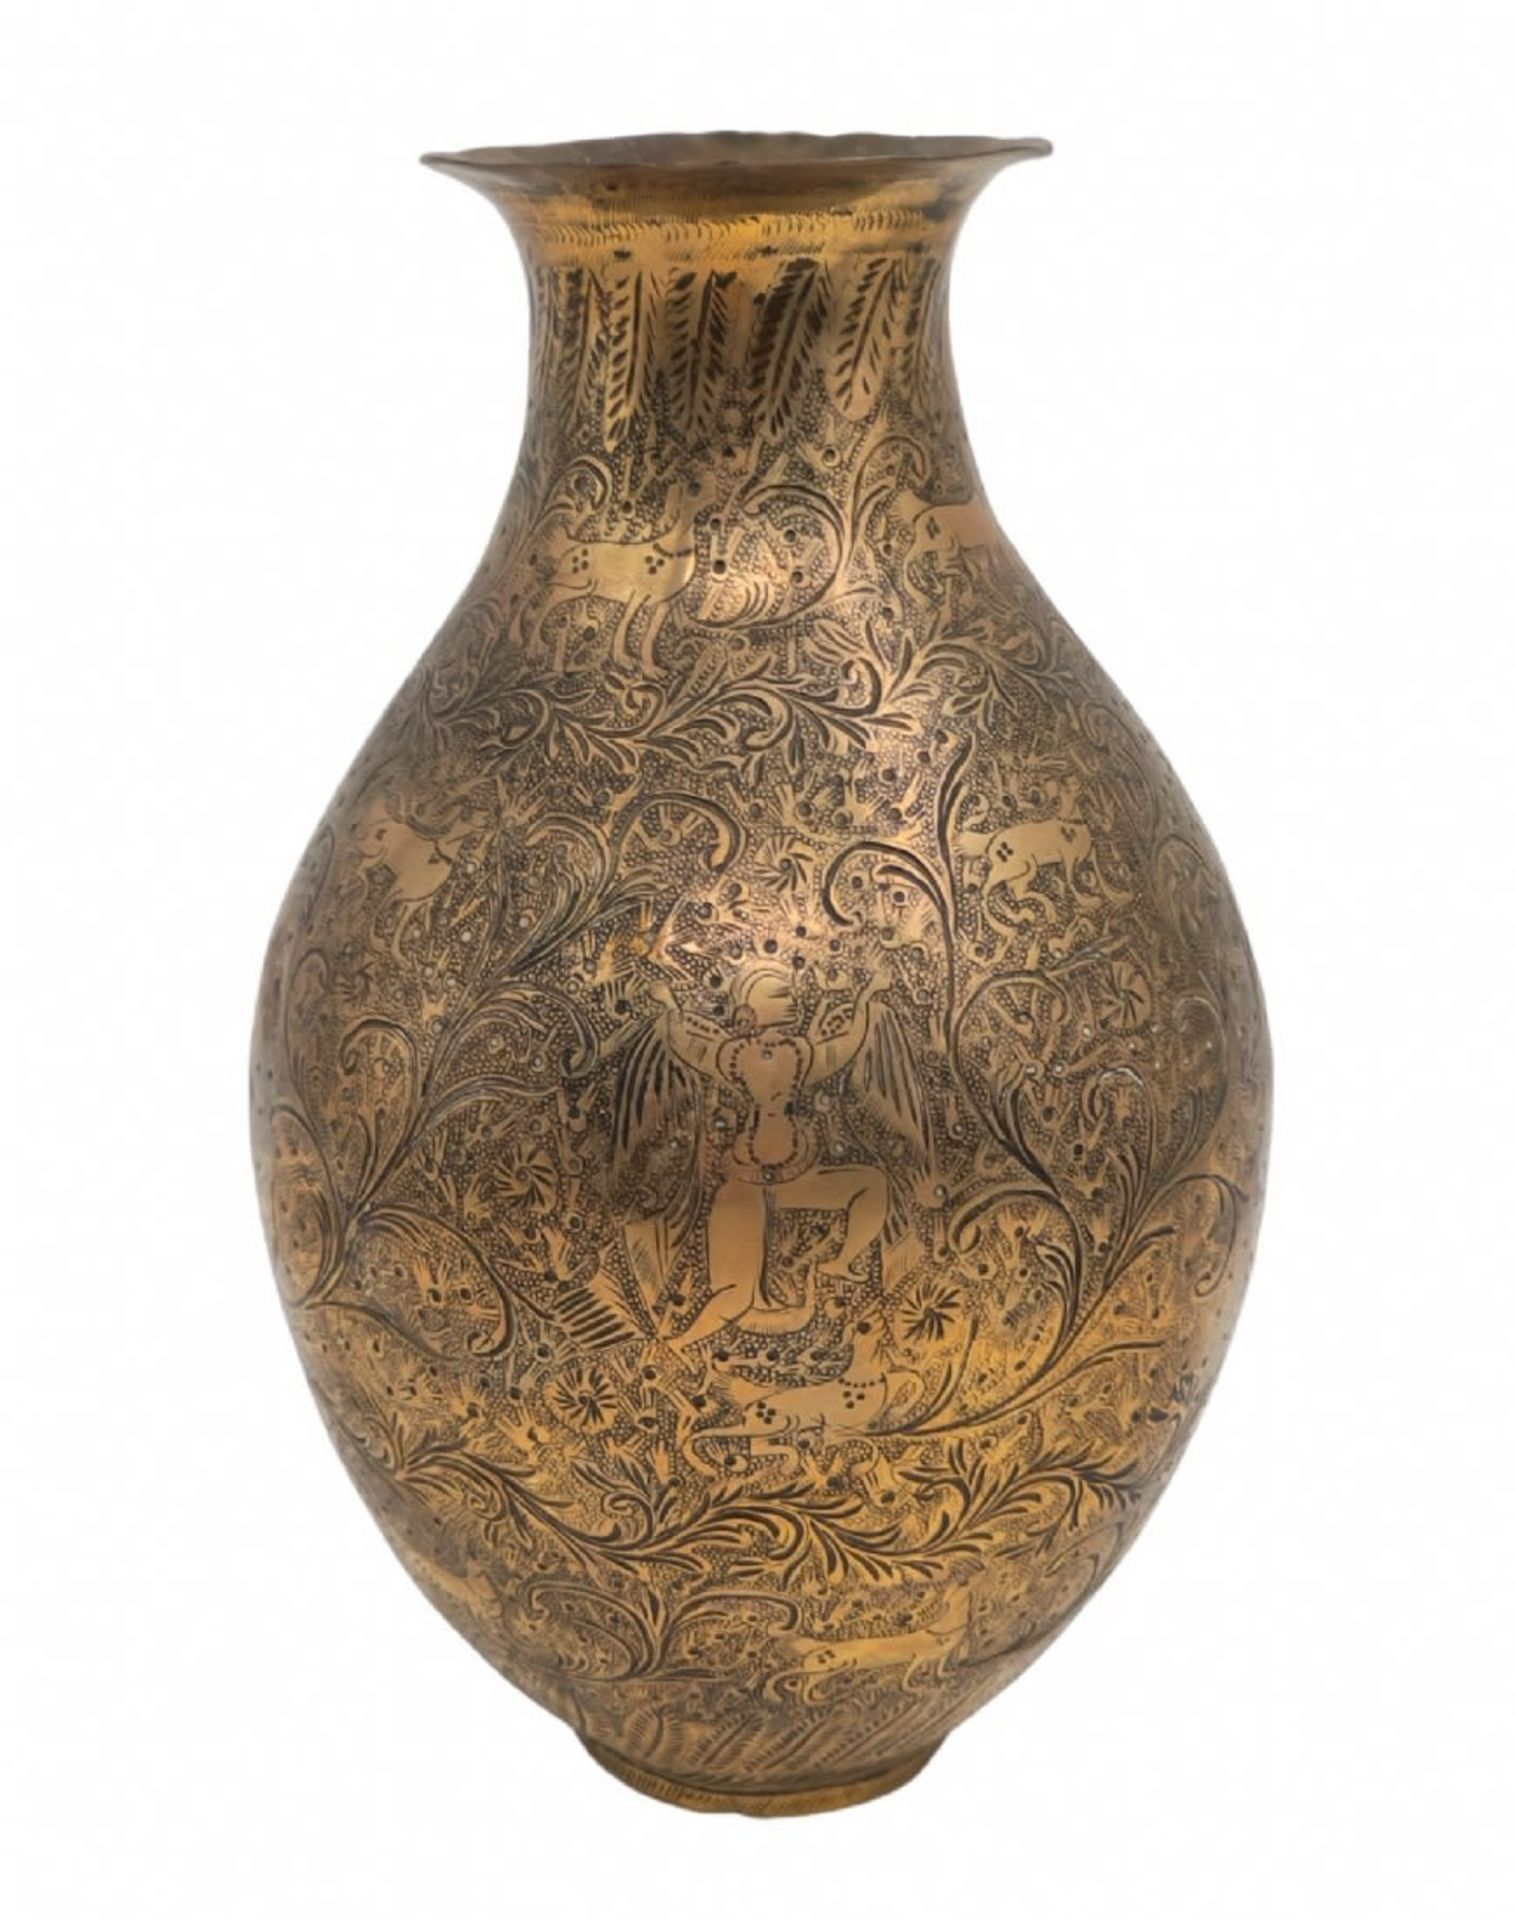 An antique Islamic urn from Mughal Empire period, made of brass, richly decorated with hand-engraved - Image 3 of 4